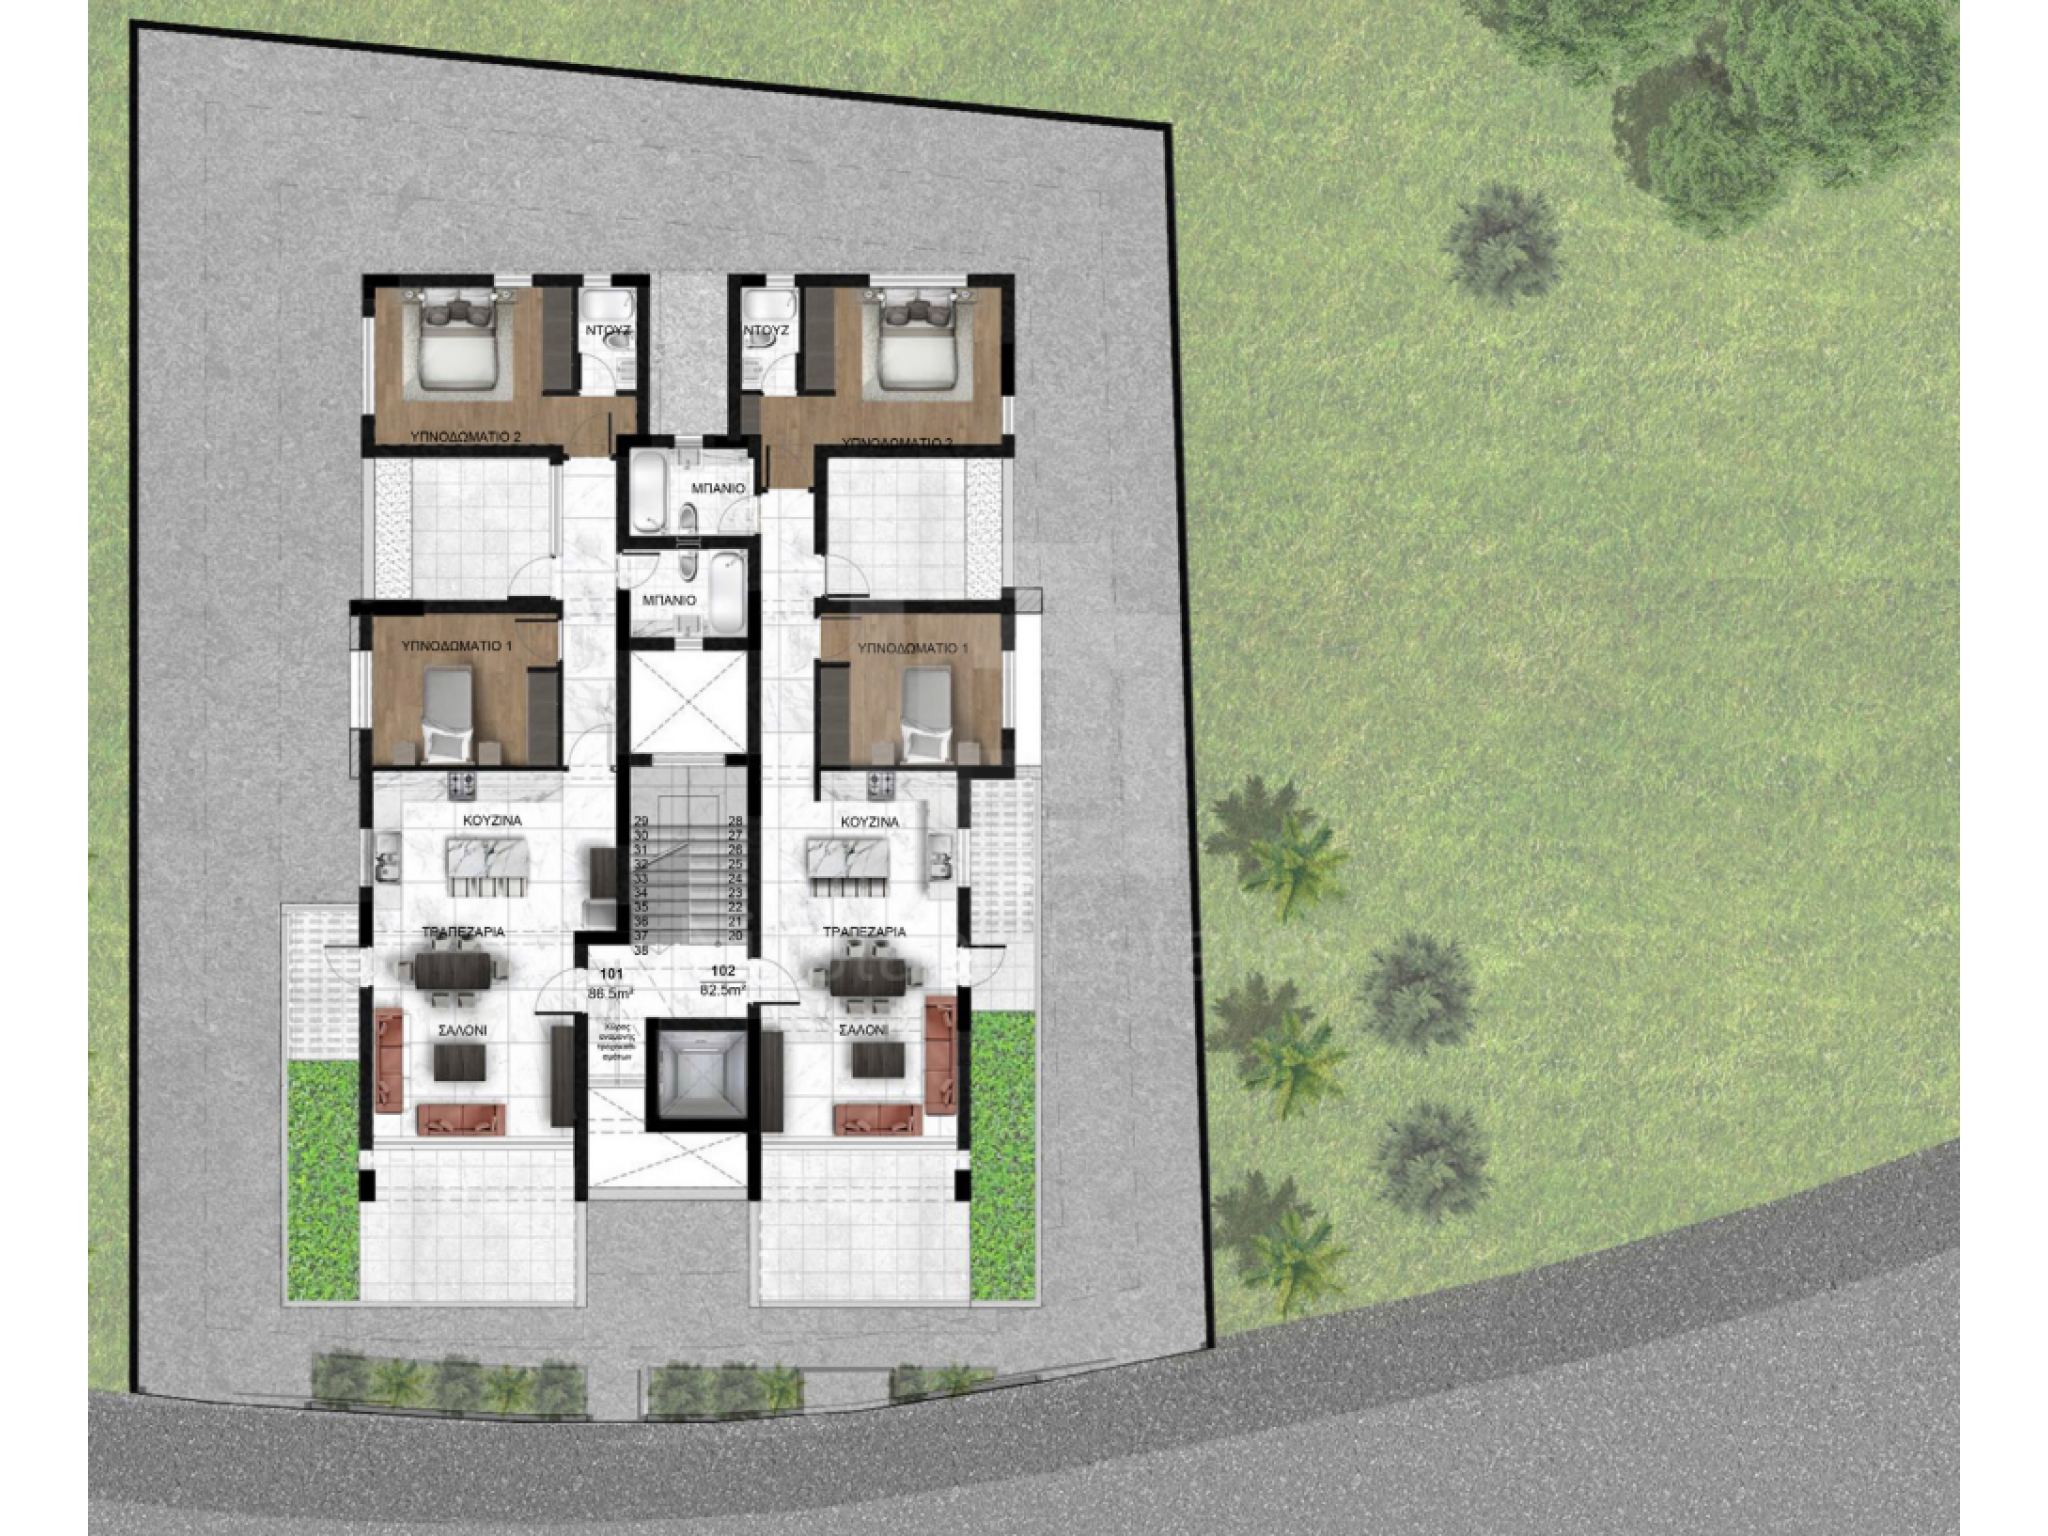 https://www.propertiescy.com/images/uploads/listings/large/17413-1632461717_1st-and-2nd-floor-plans.png